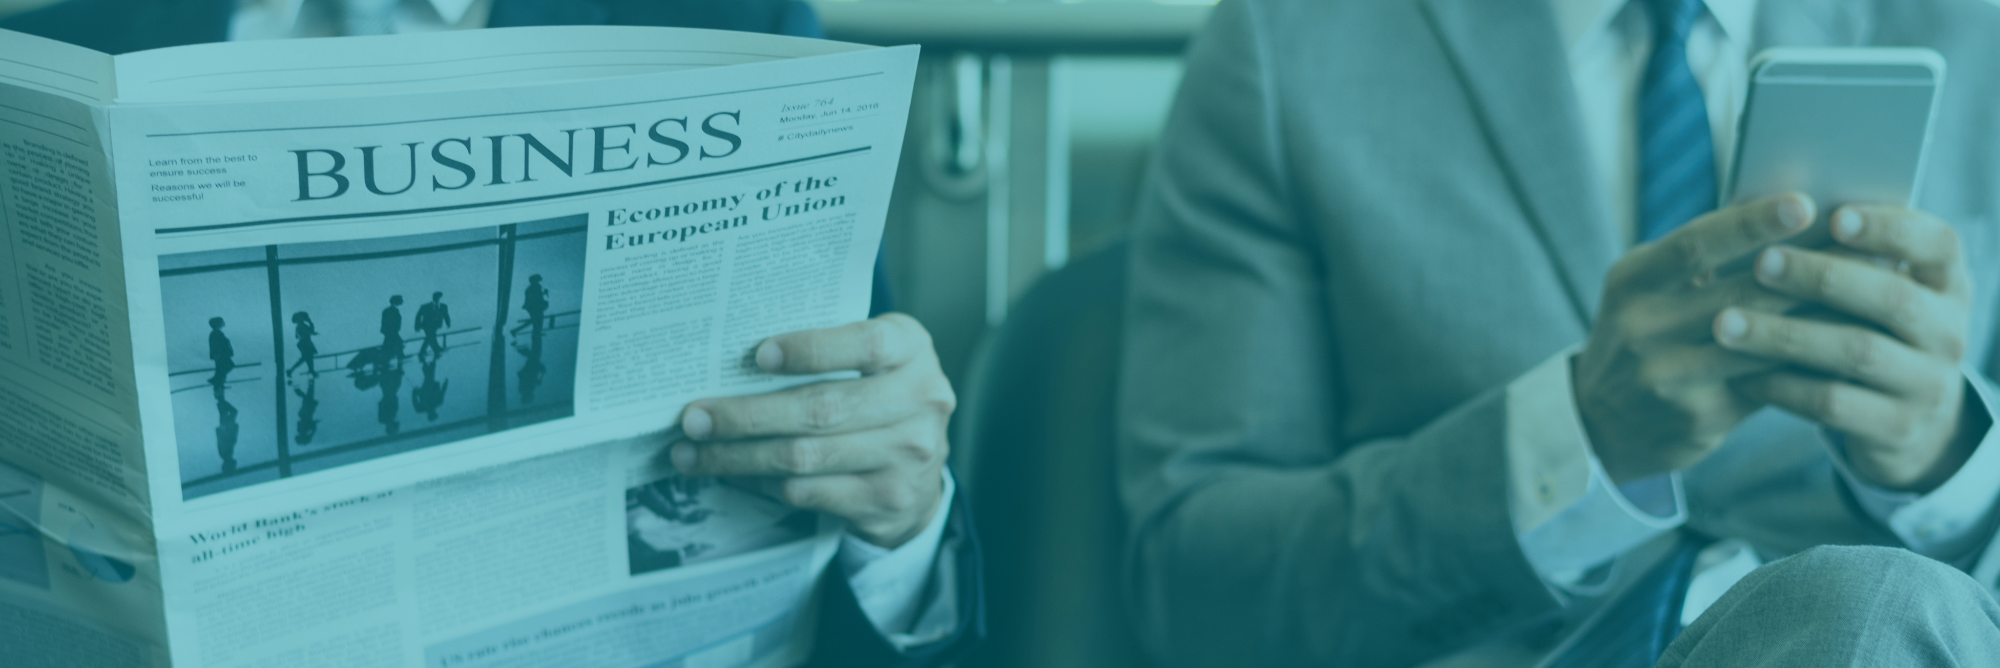 Why Traditional Media Remains Relevant for Businesses Today